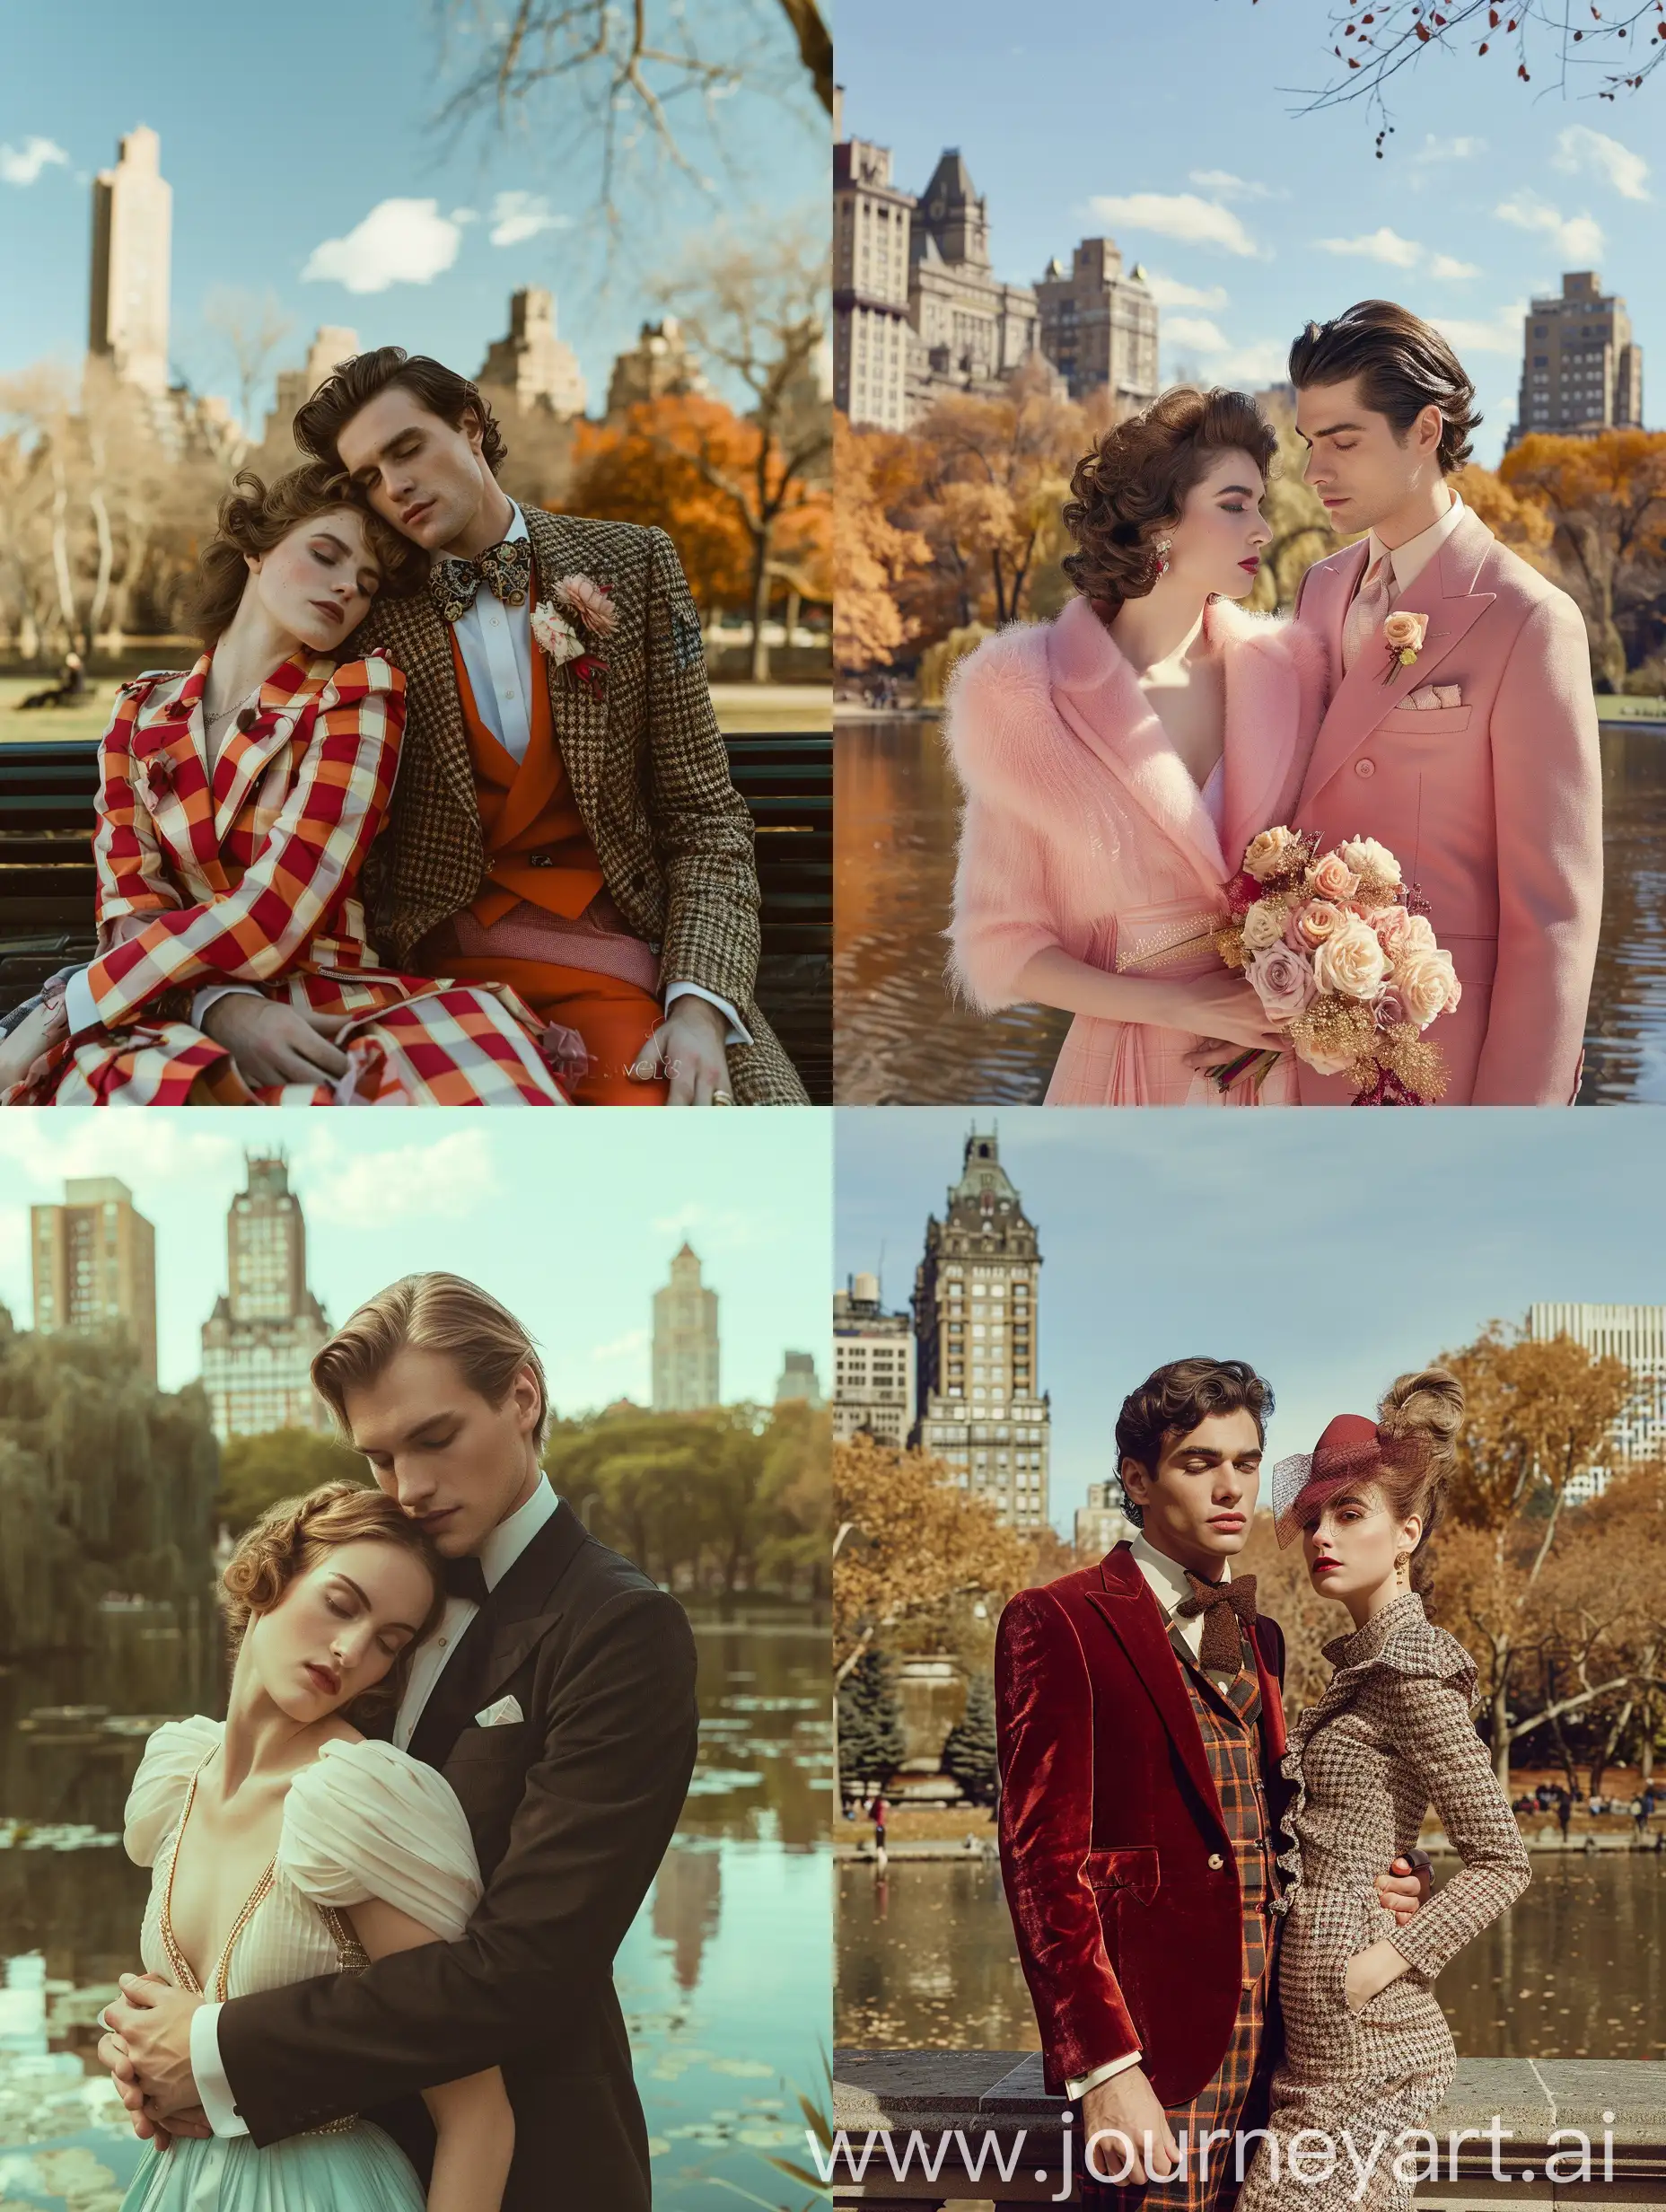 Stylish-Couples-Vogue-Photoshoot-with-Wes-Anderson-Aesthetic-in-Central-Park